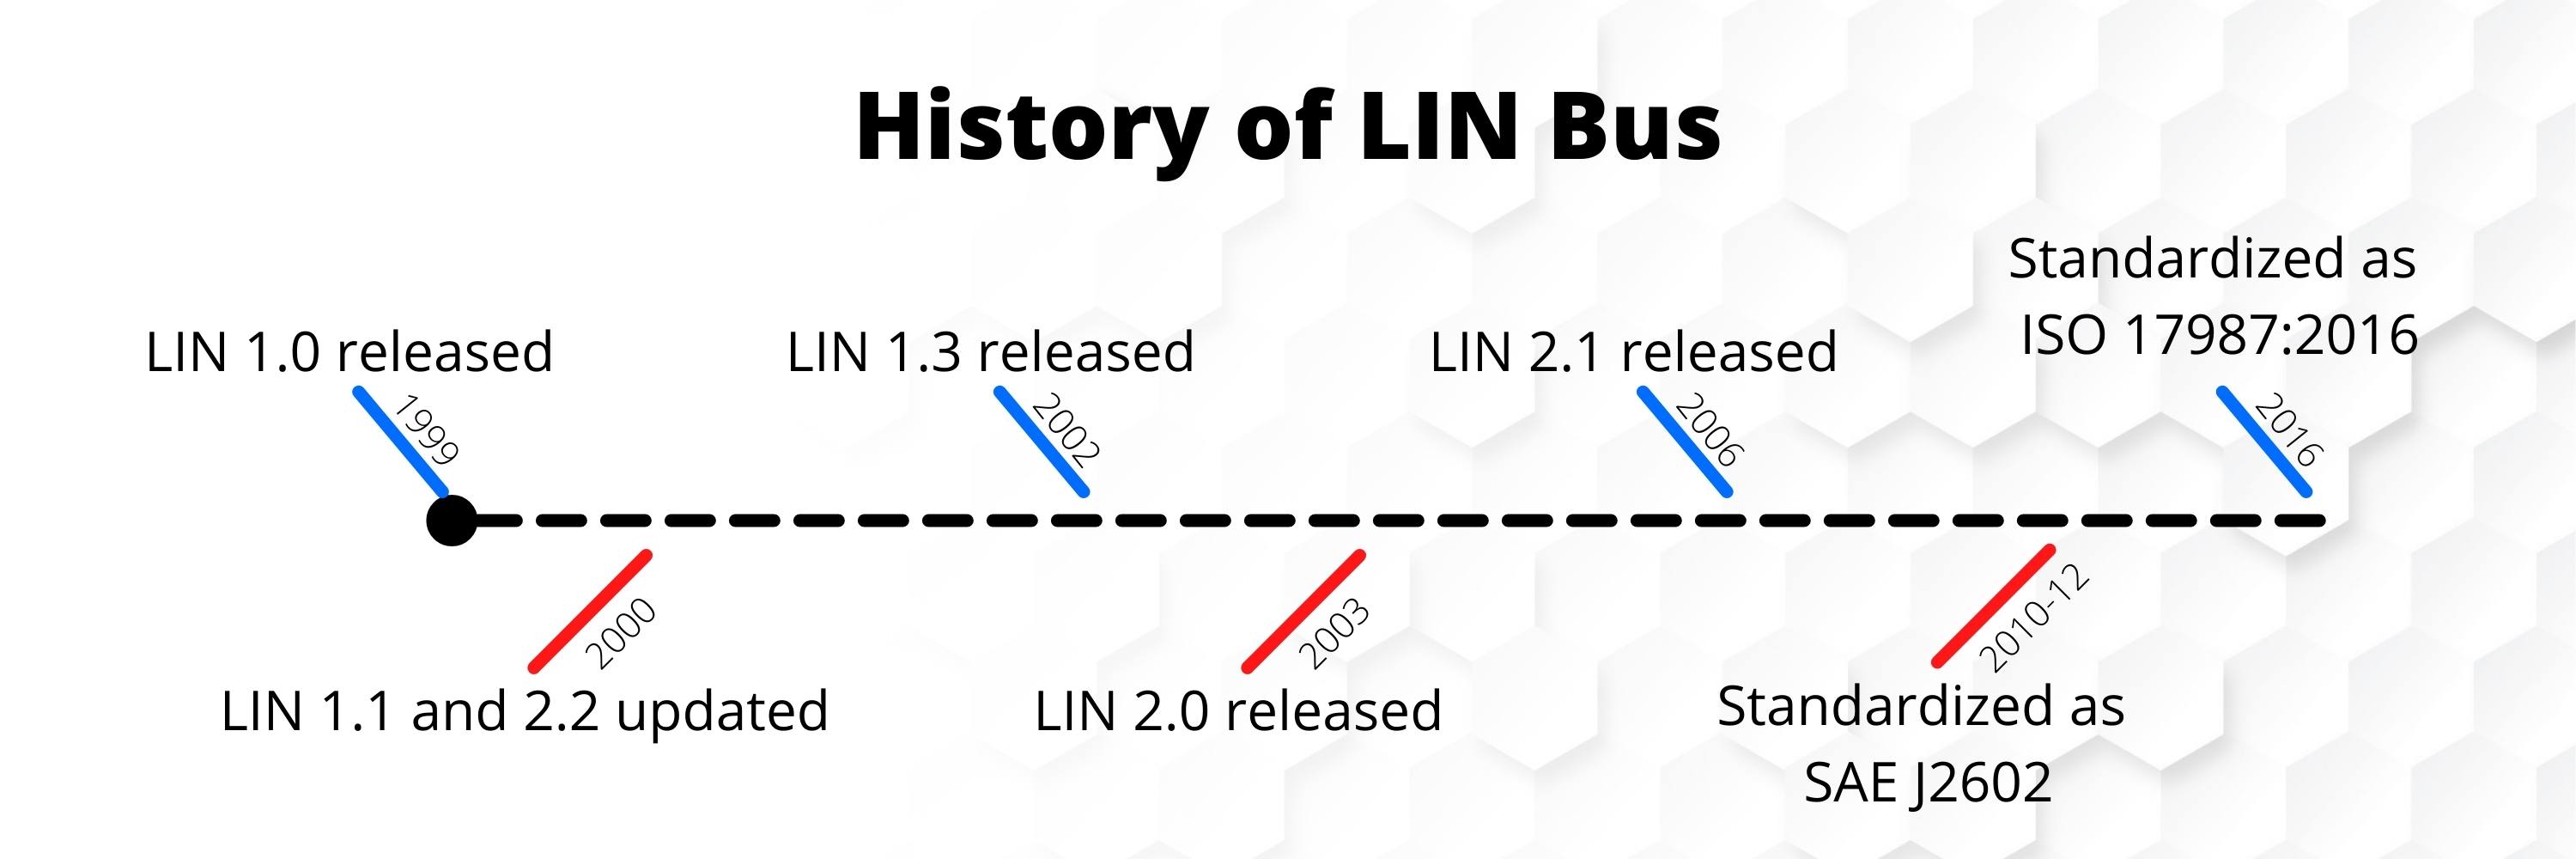 Timeline showing the history of LIN bus